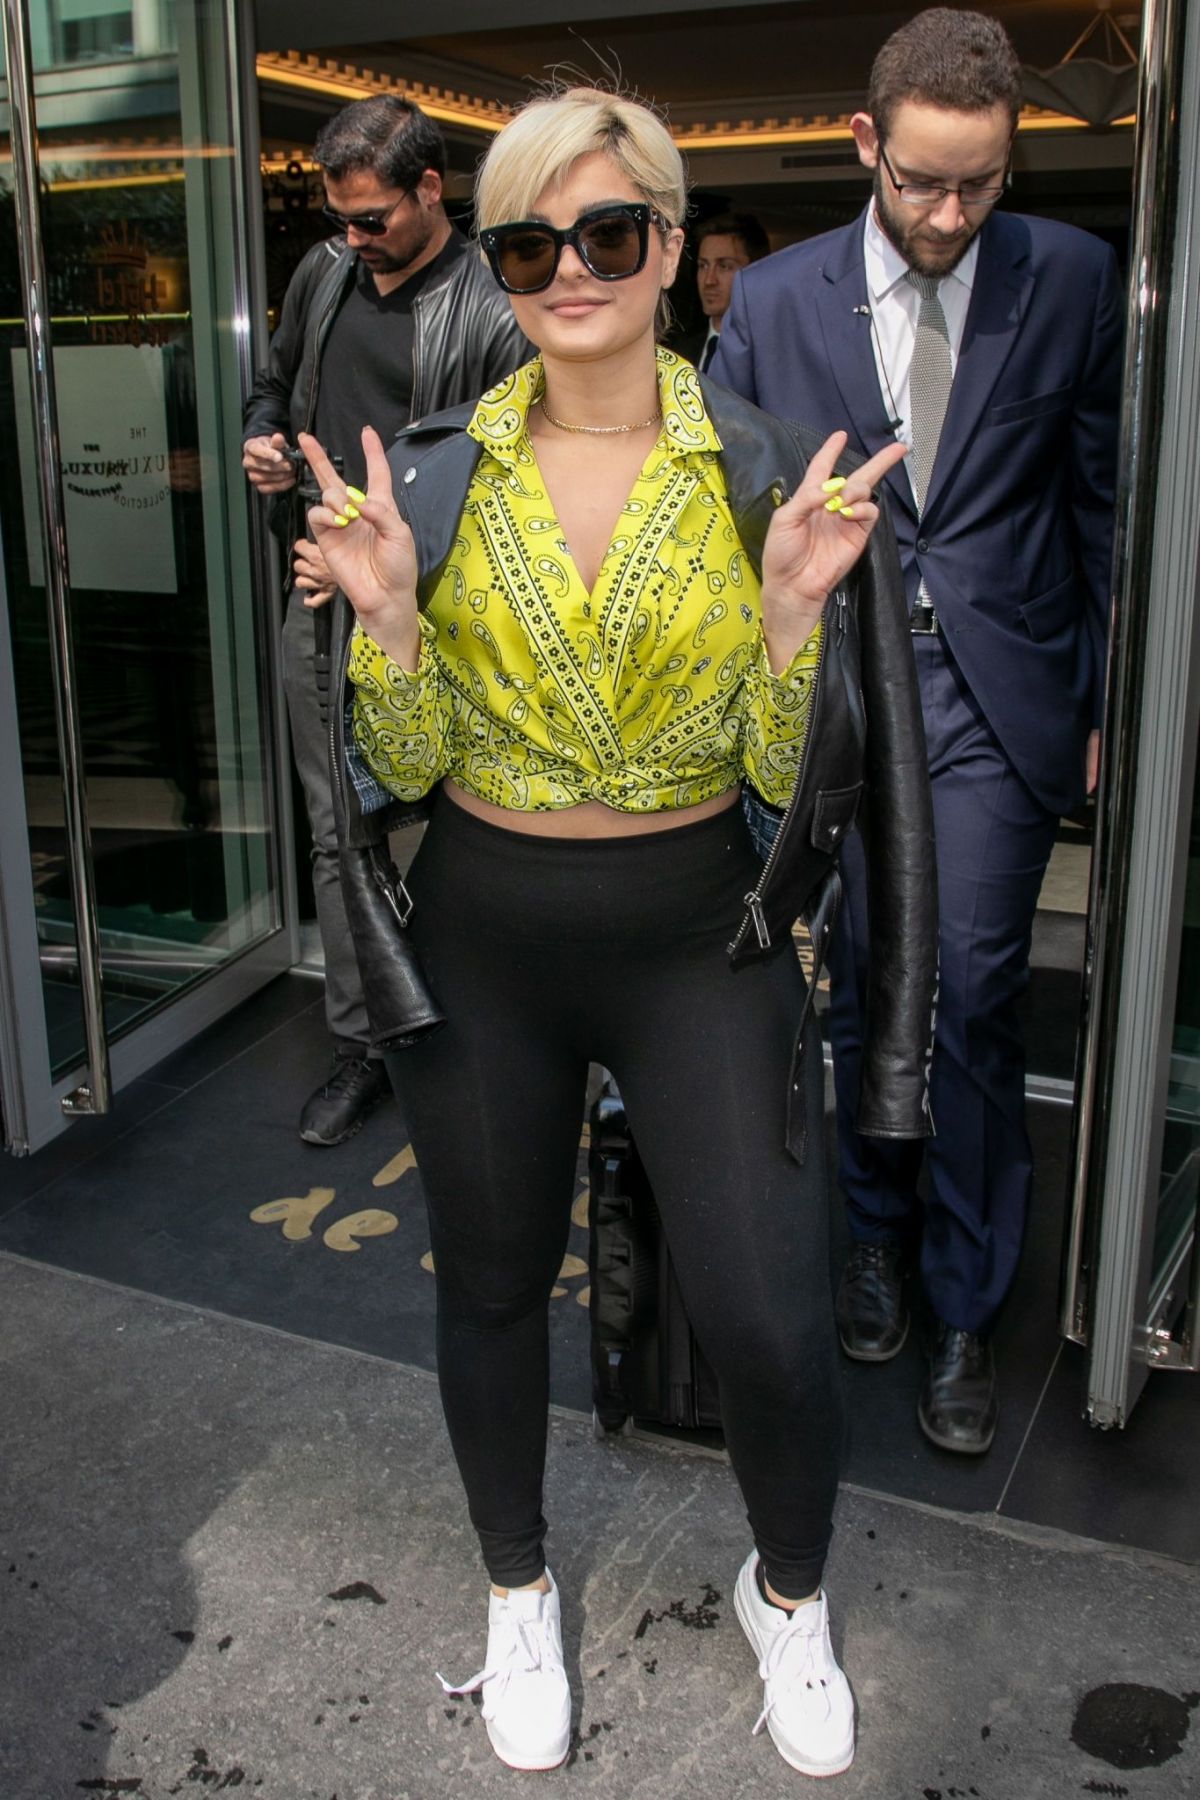 bebe-rexha-out-and-about-in-paris-04-12-2019-1.jpg